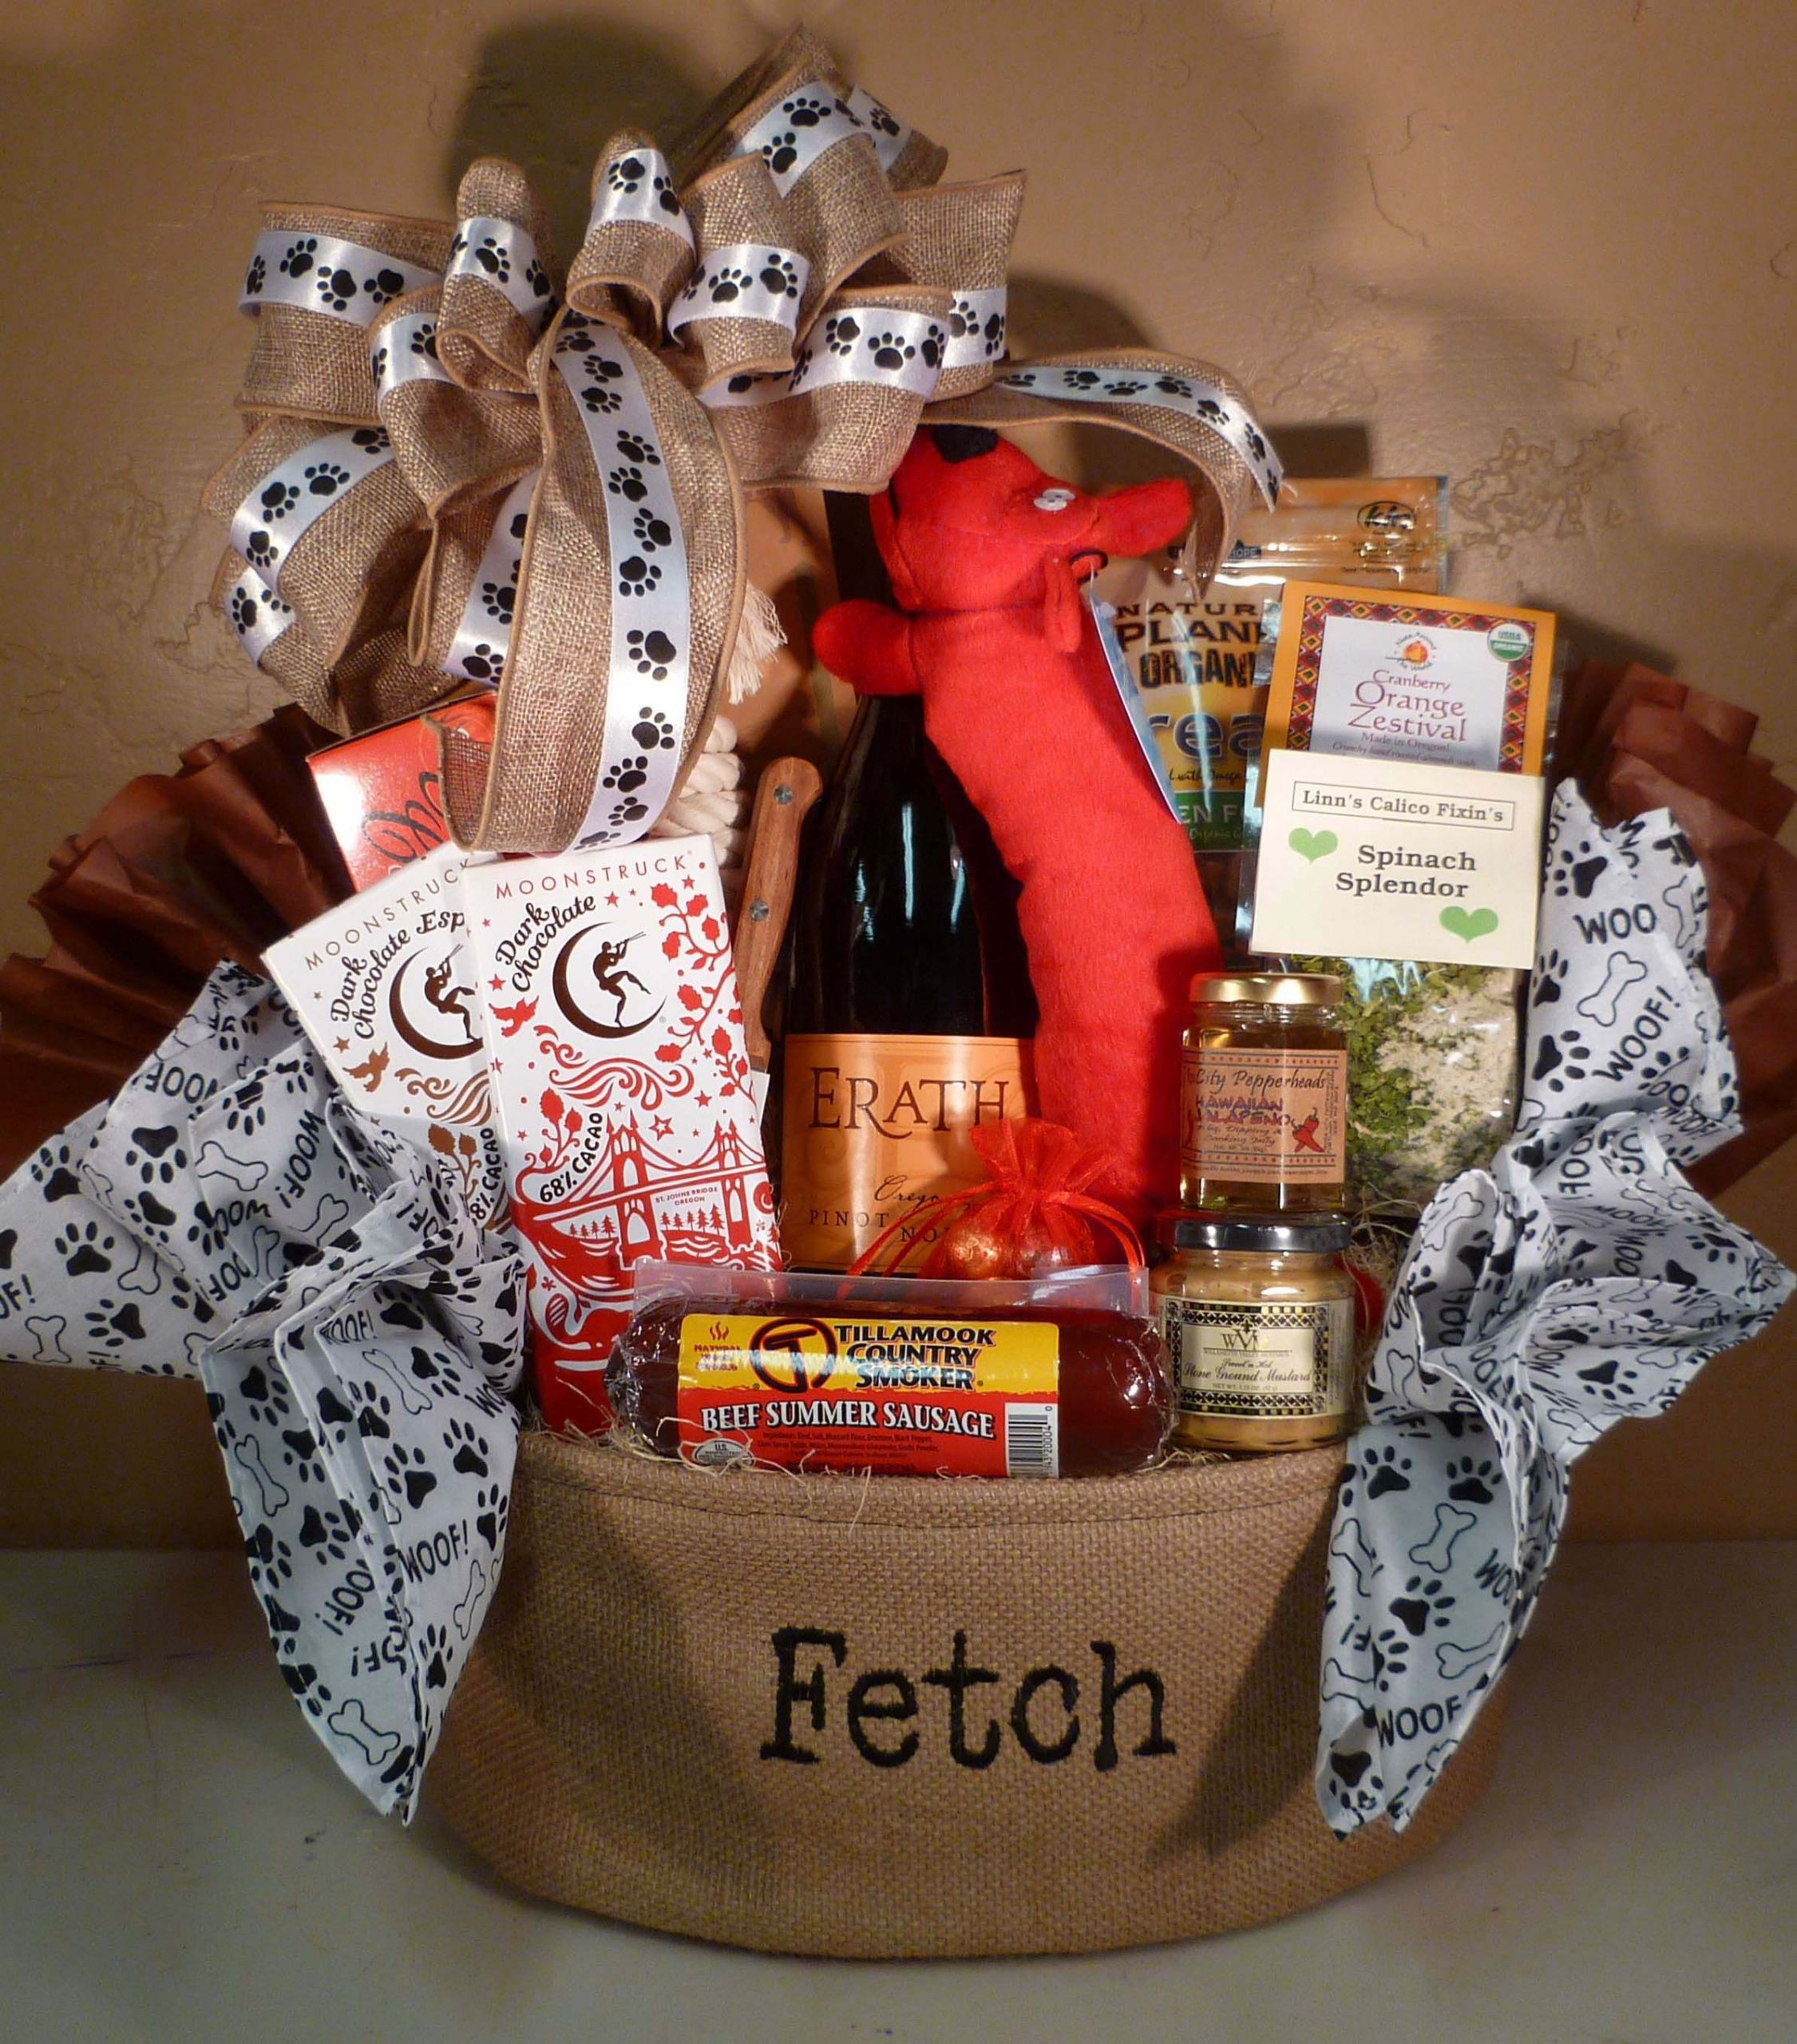 Themed Gift Basket Ideas For Auctions
 Dog Themed basket for raffle idea mix of treats for